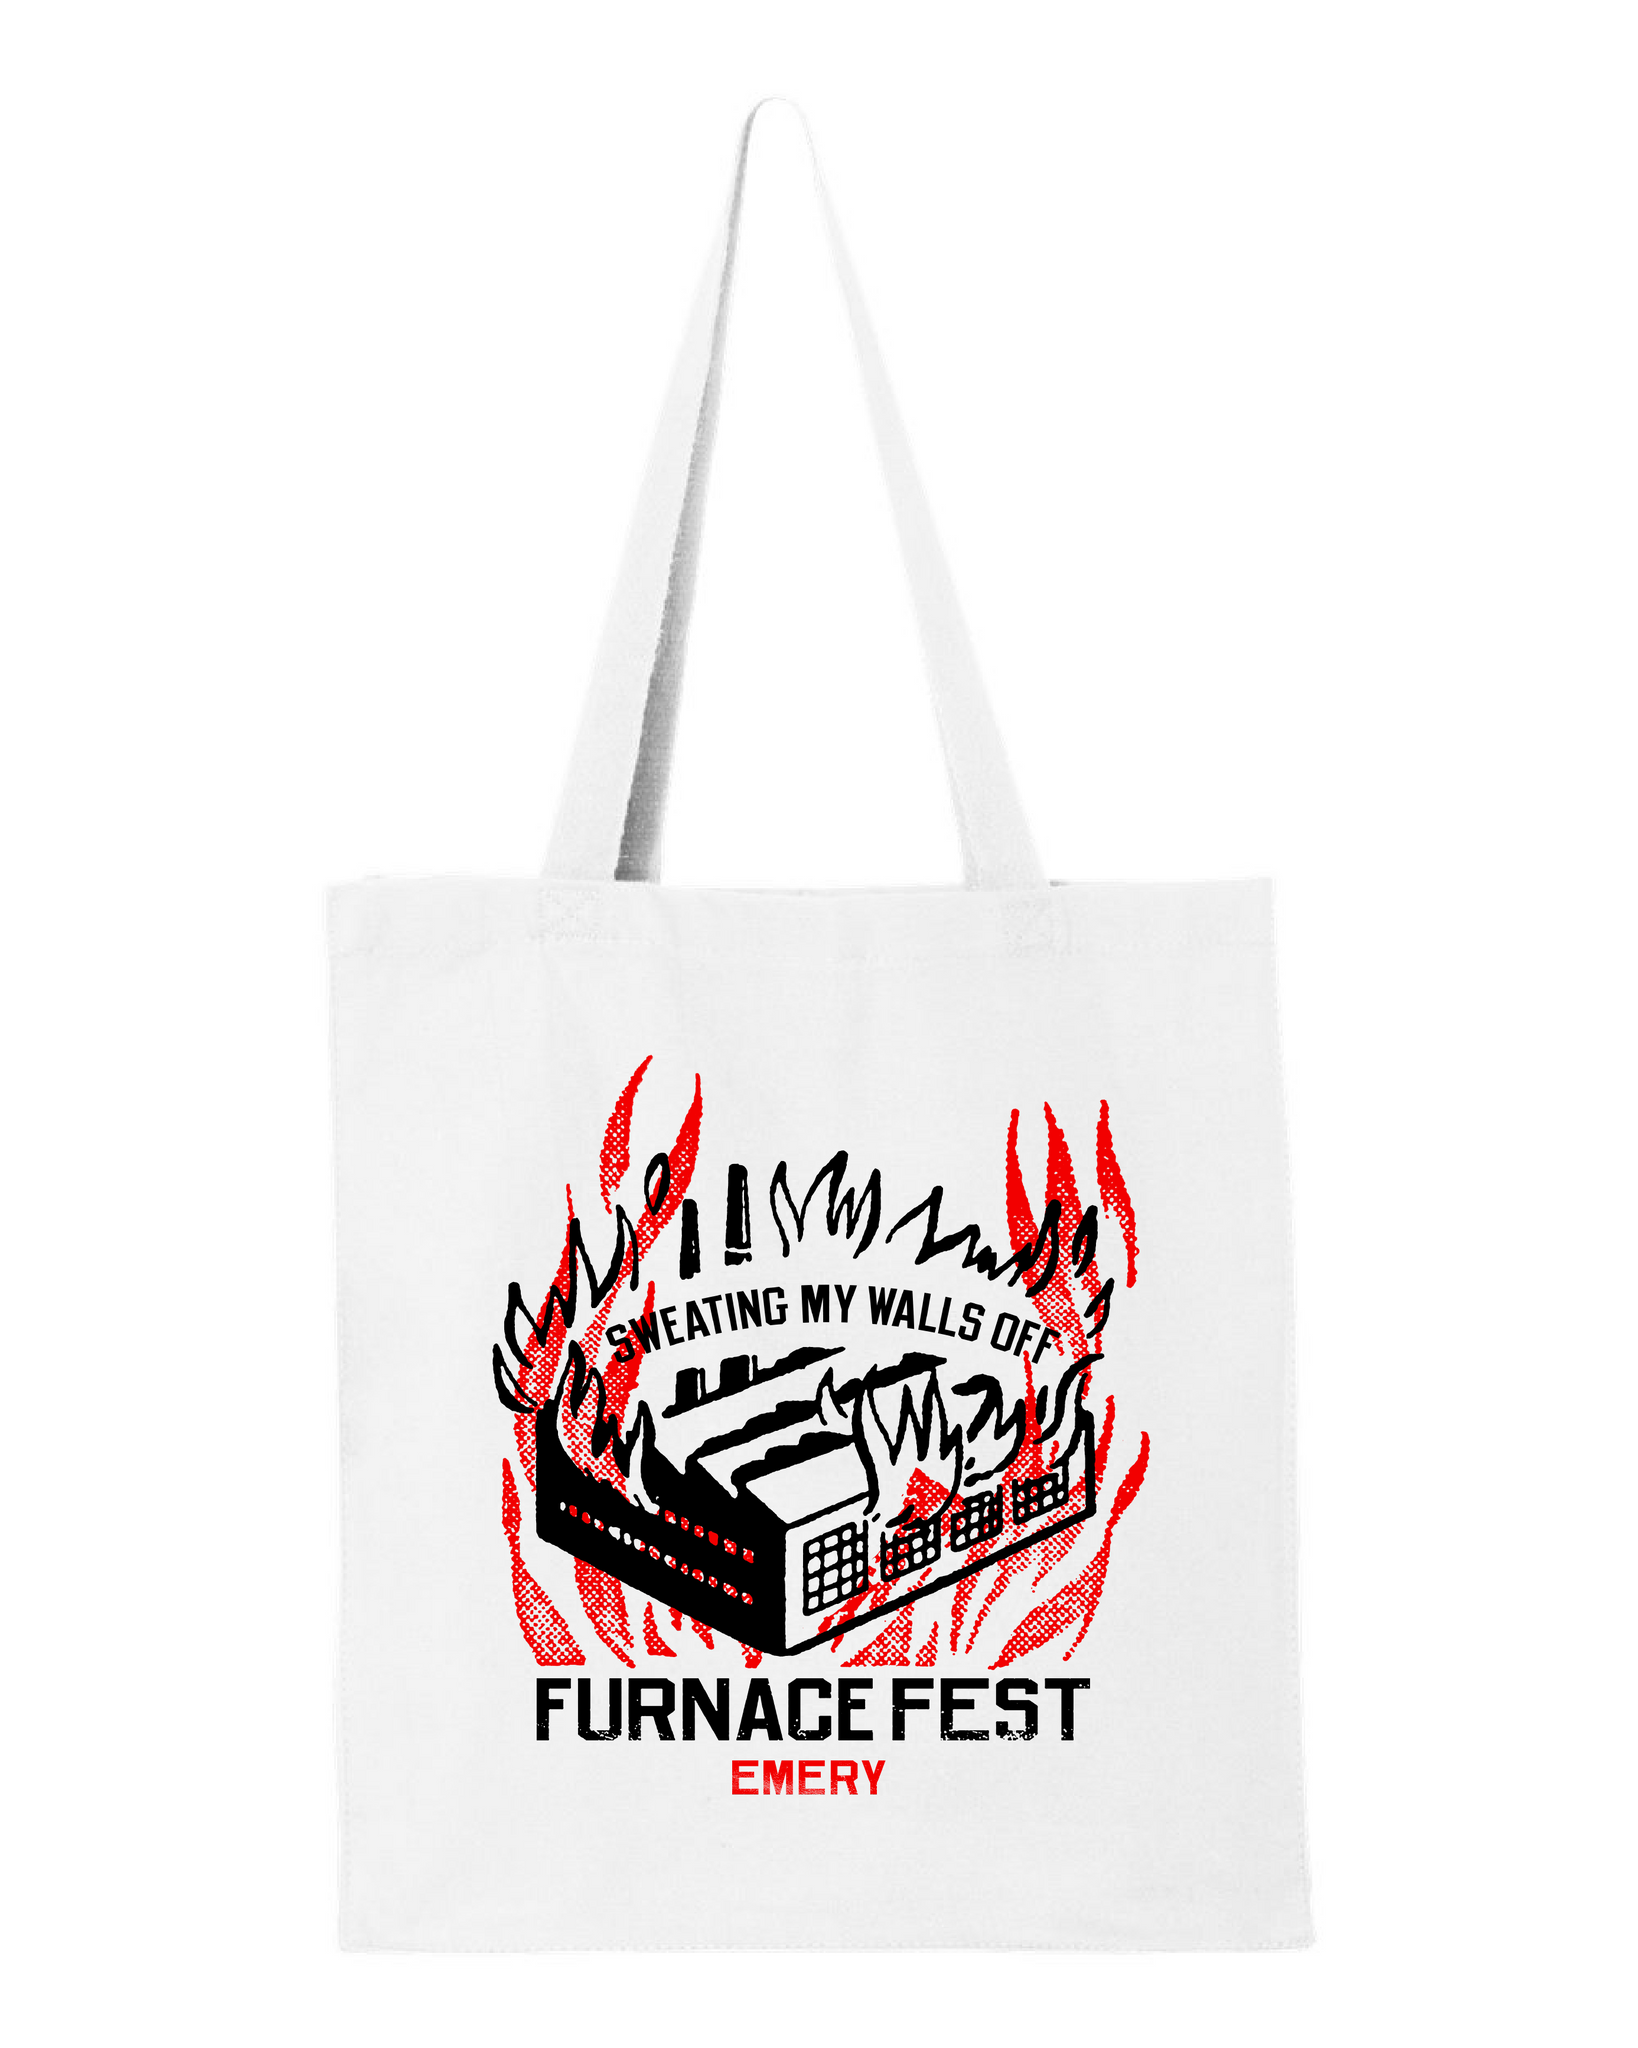 Sweating My Walls Off Tote Bag (Furnace Fest)